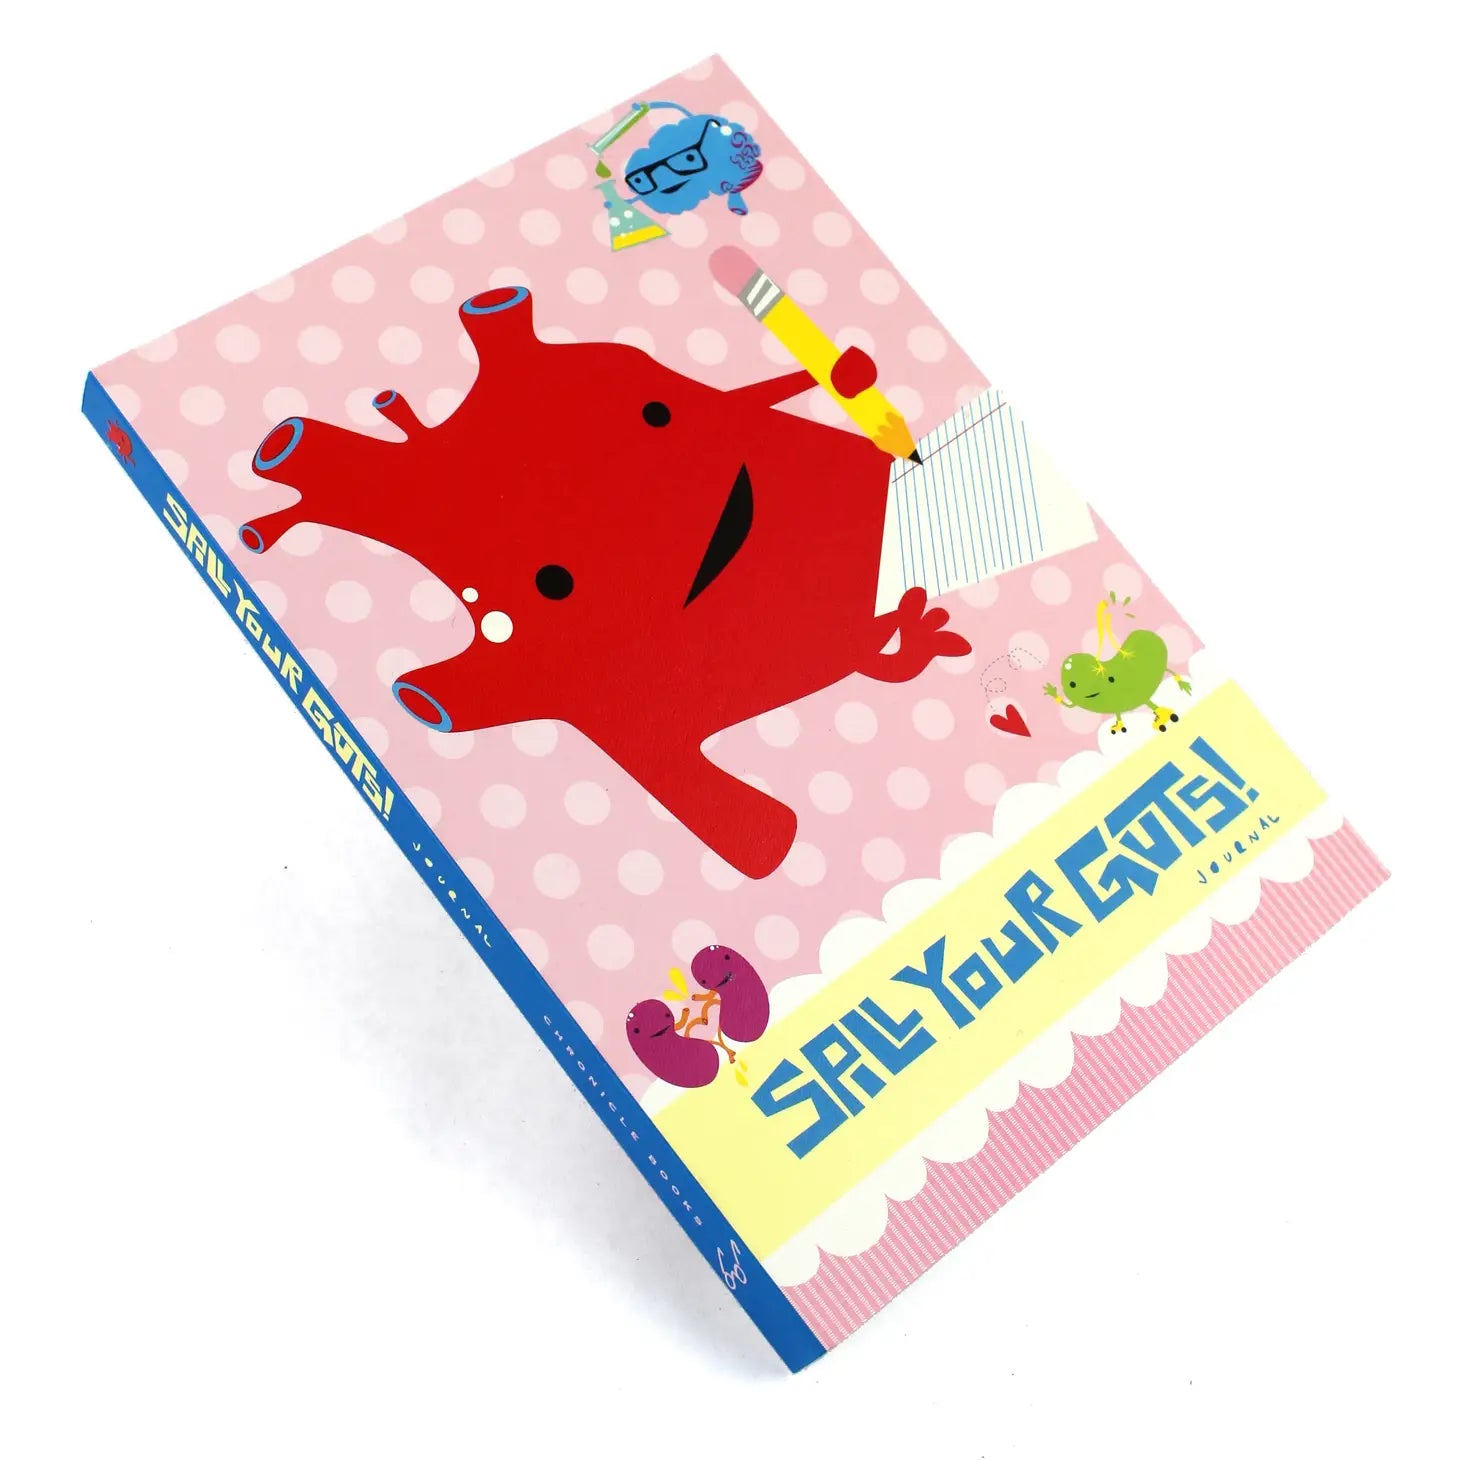 Softcover notitieboekje "Spill your guts"